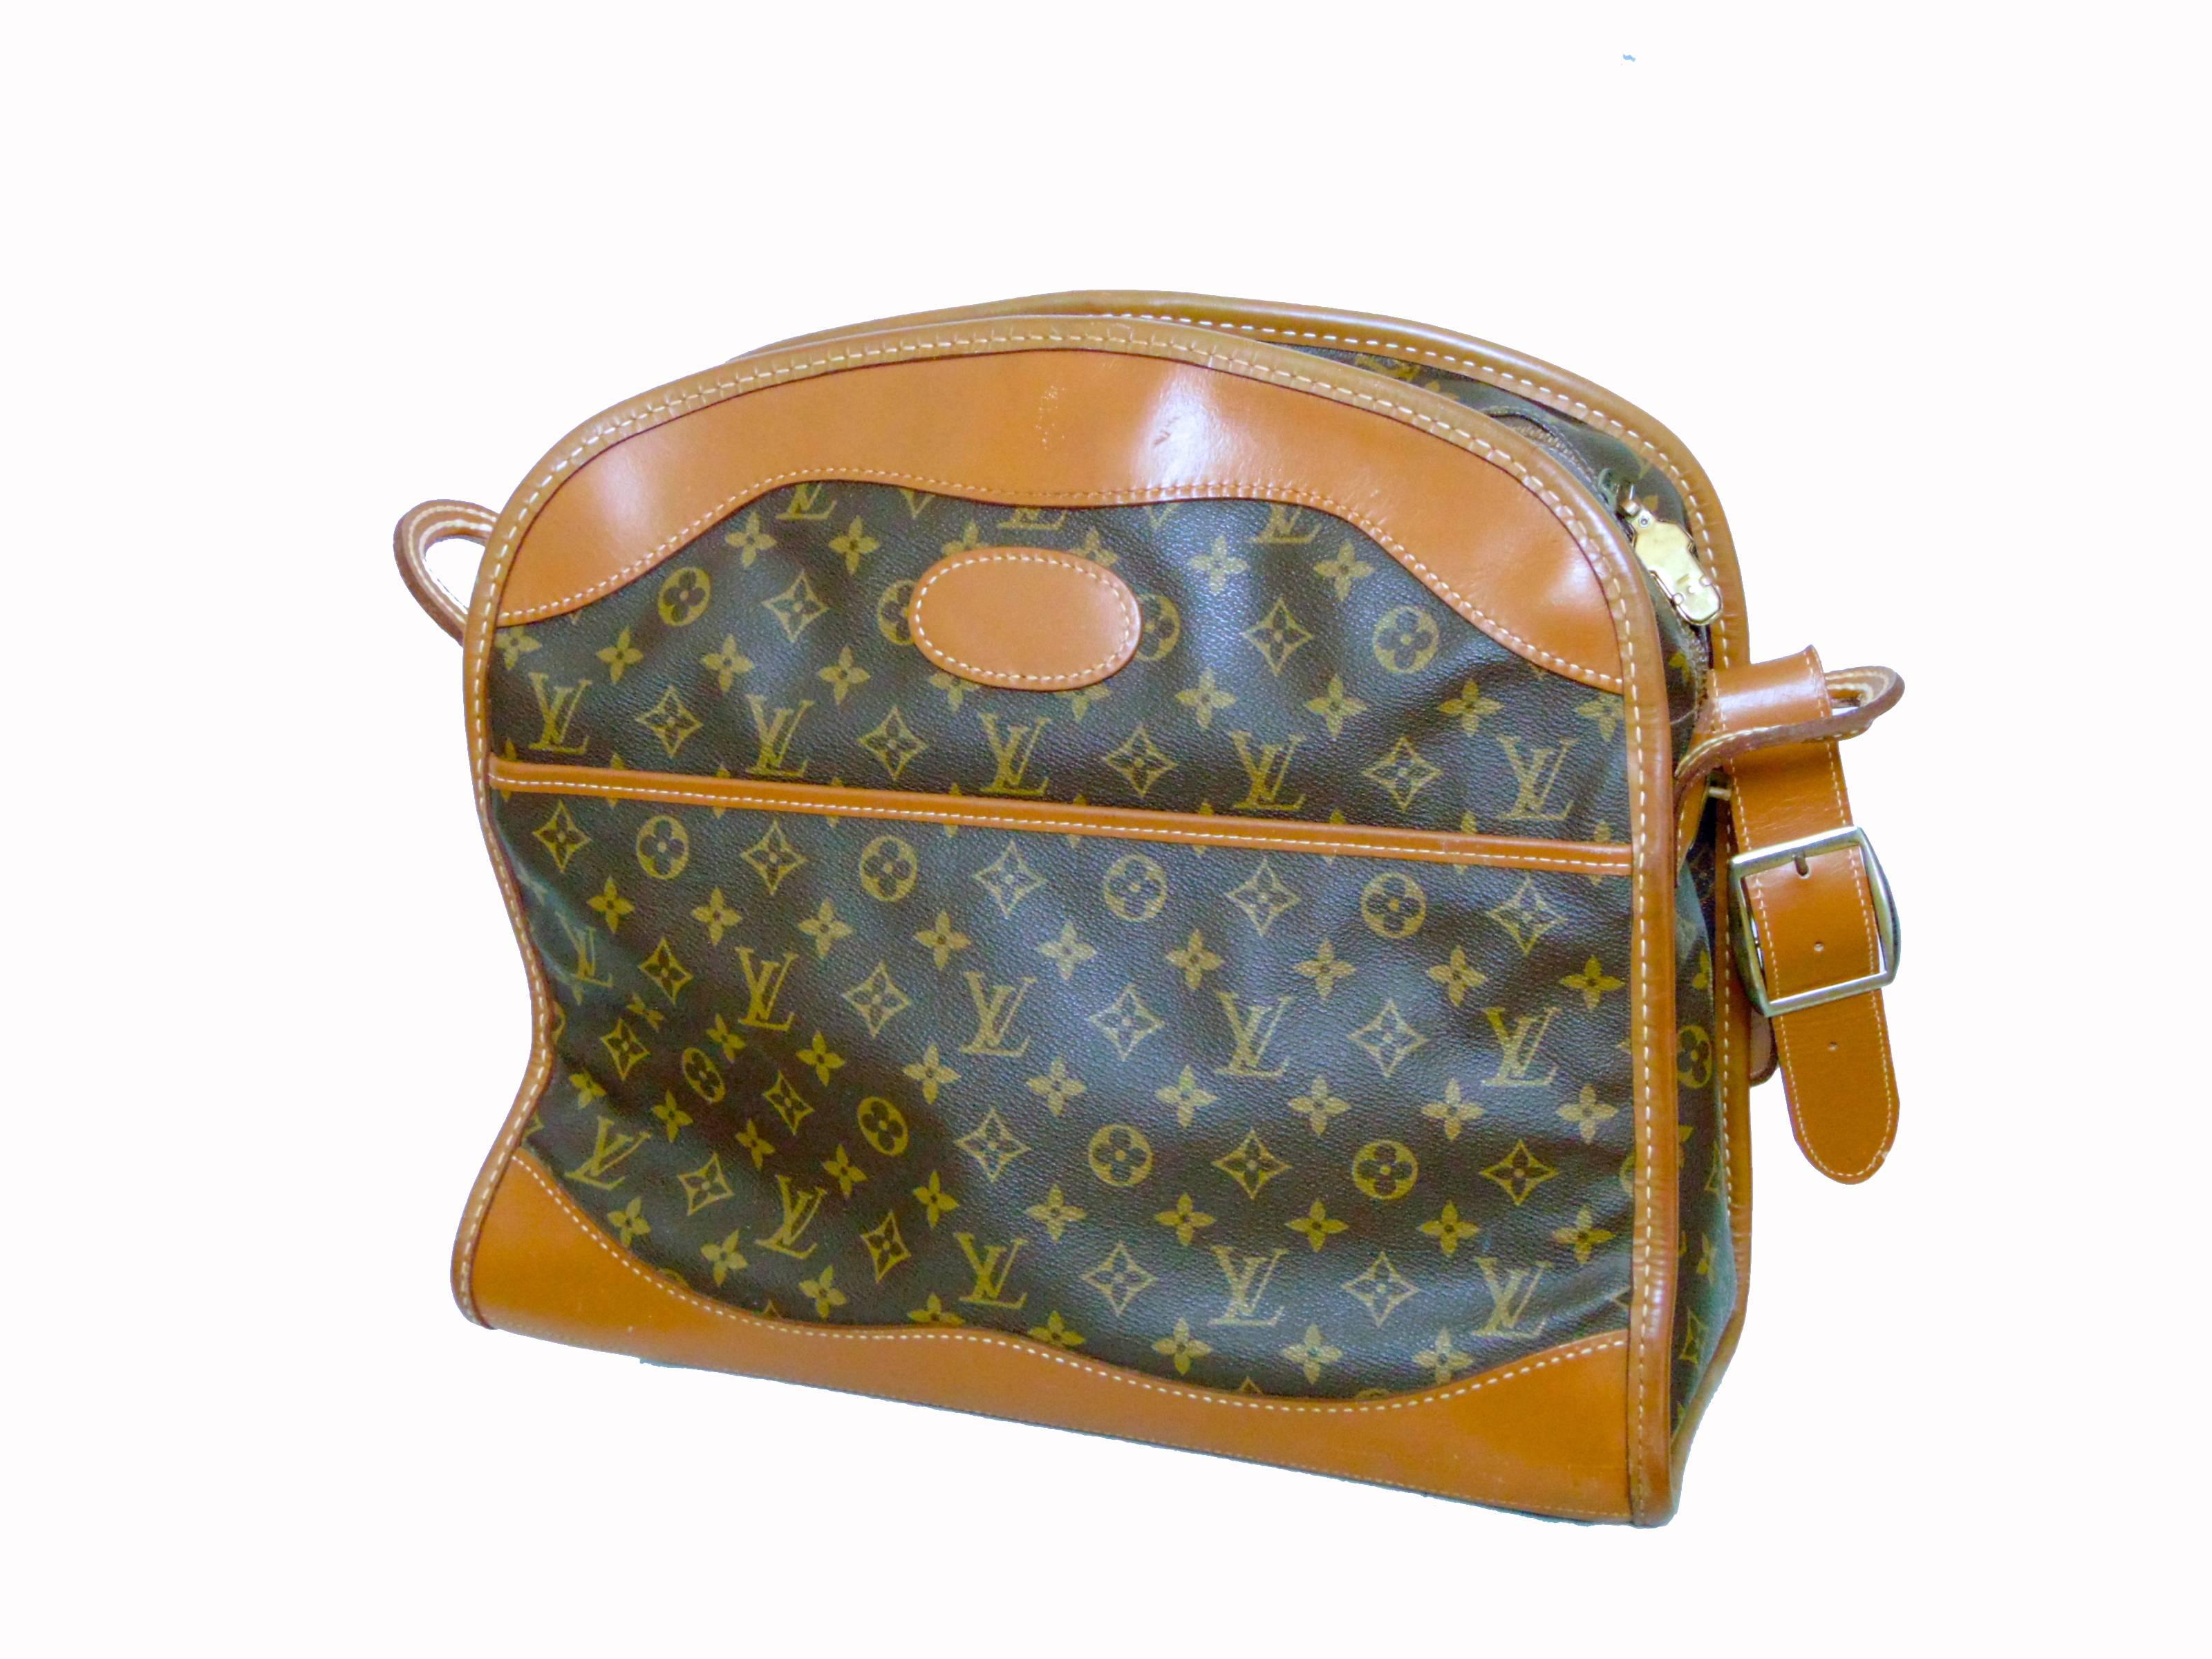 Brown Louis Vuitton The French Company Carry On Travel Bag Monogram Canvas 1970s